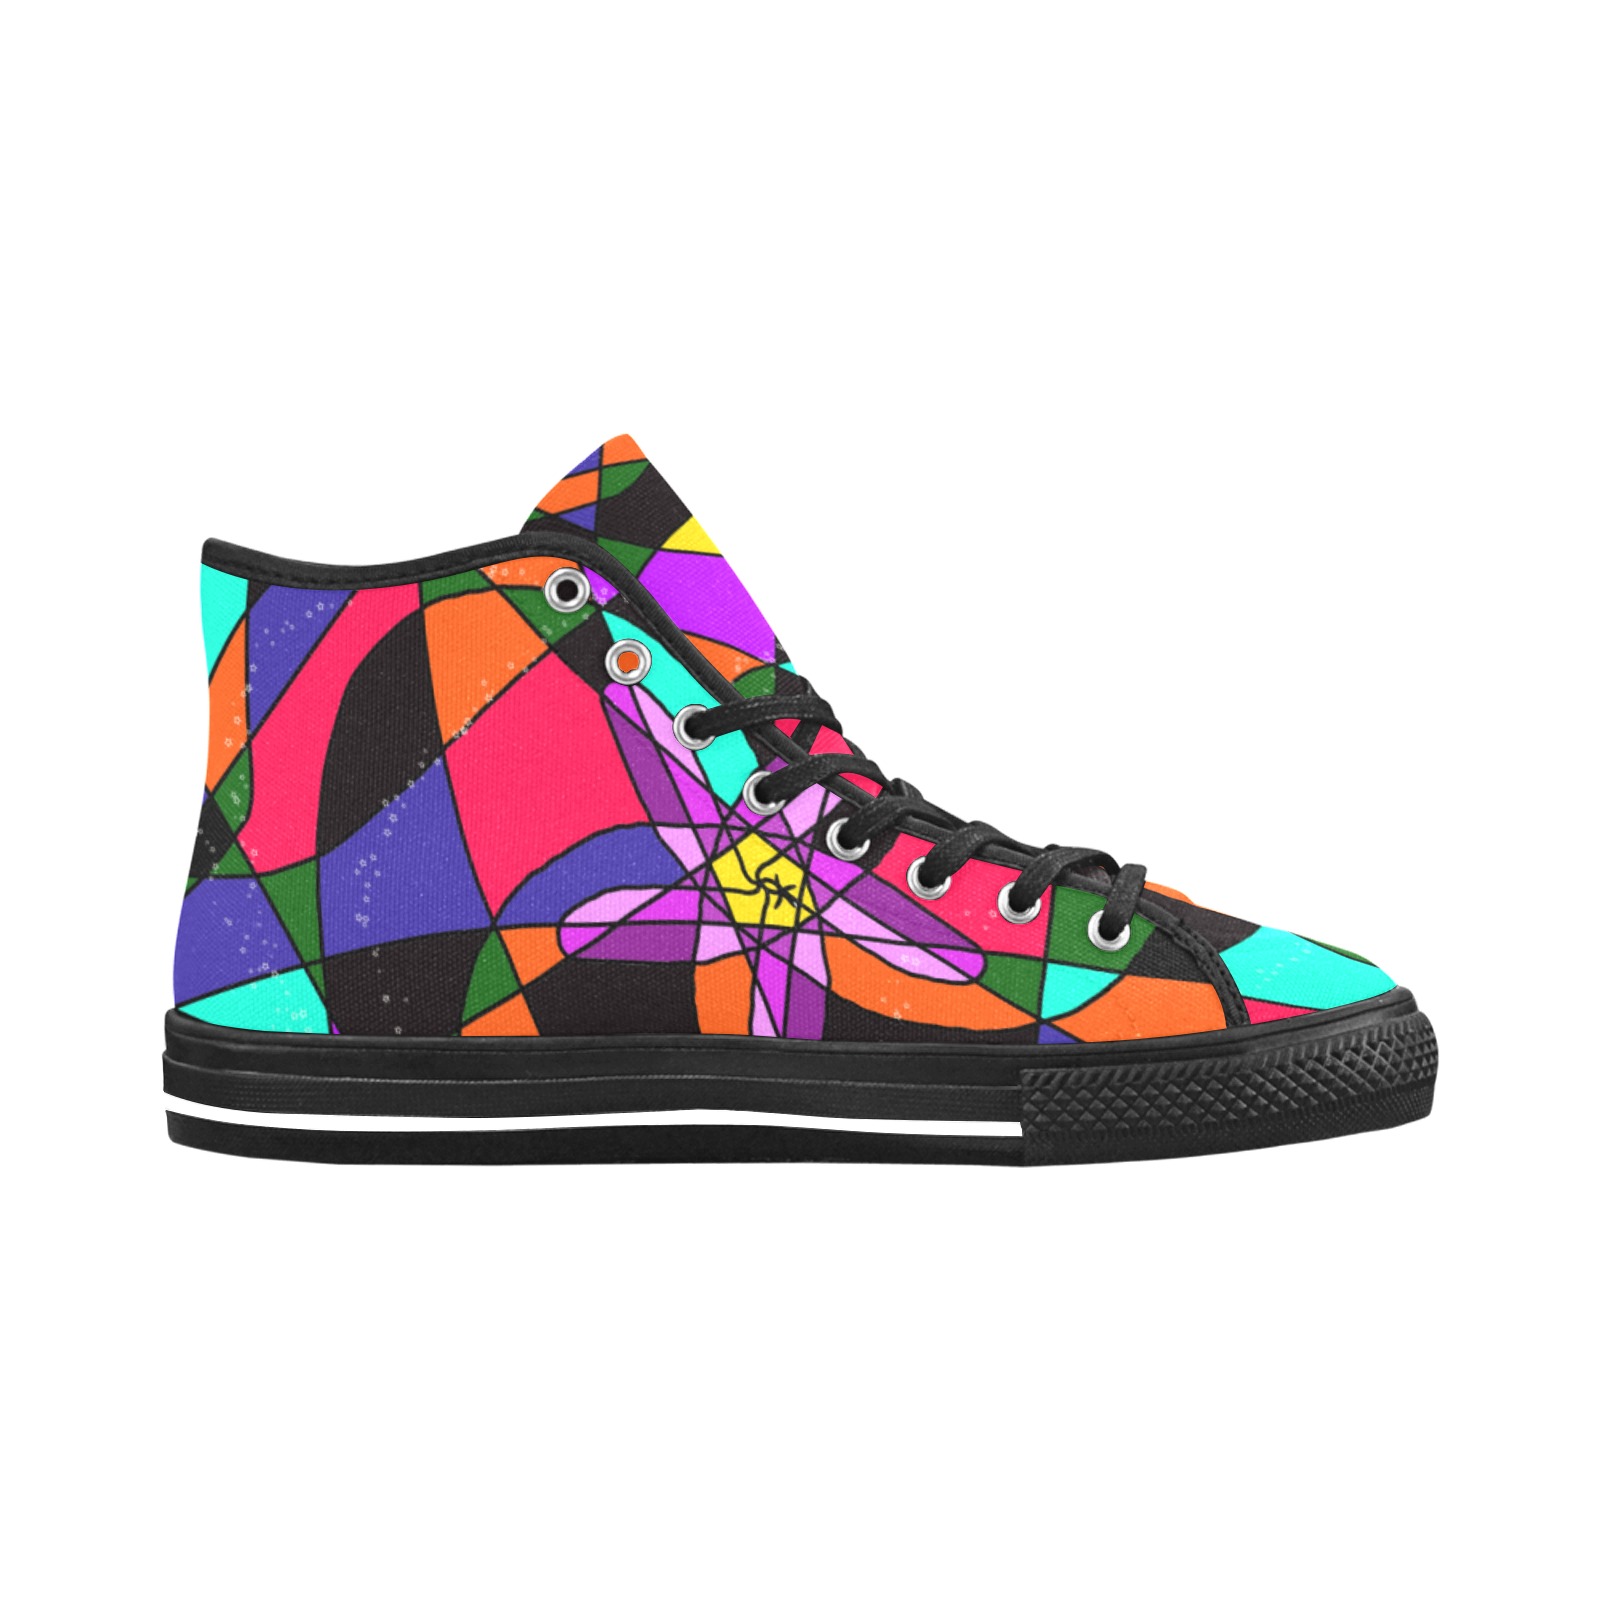 Abstract Design S 2020 Vancouver H Women's Canvas Shoes (1013-1)